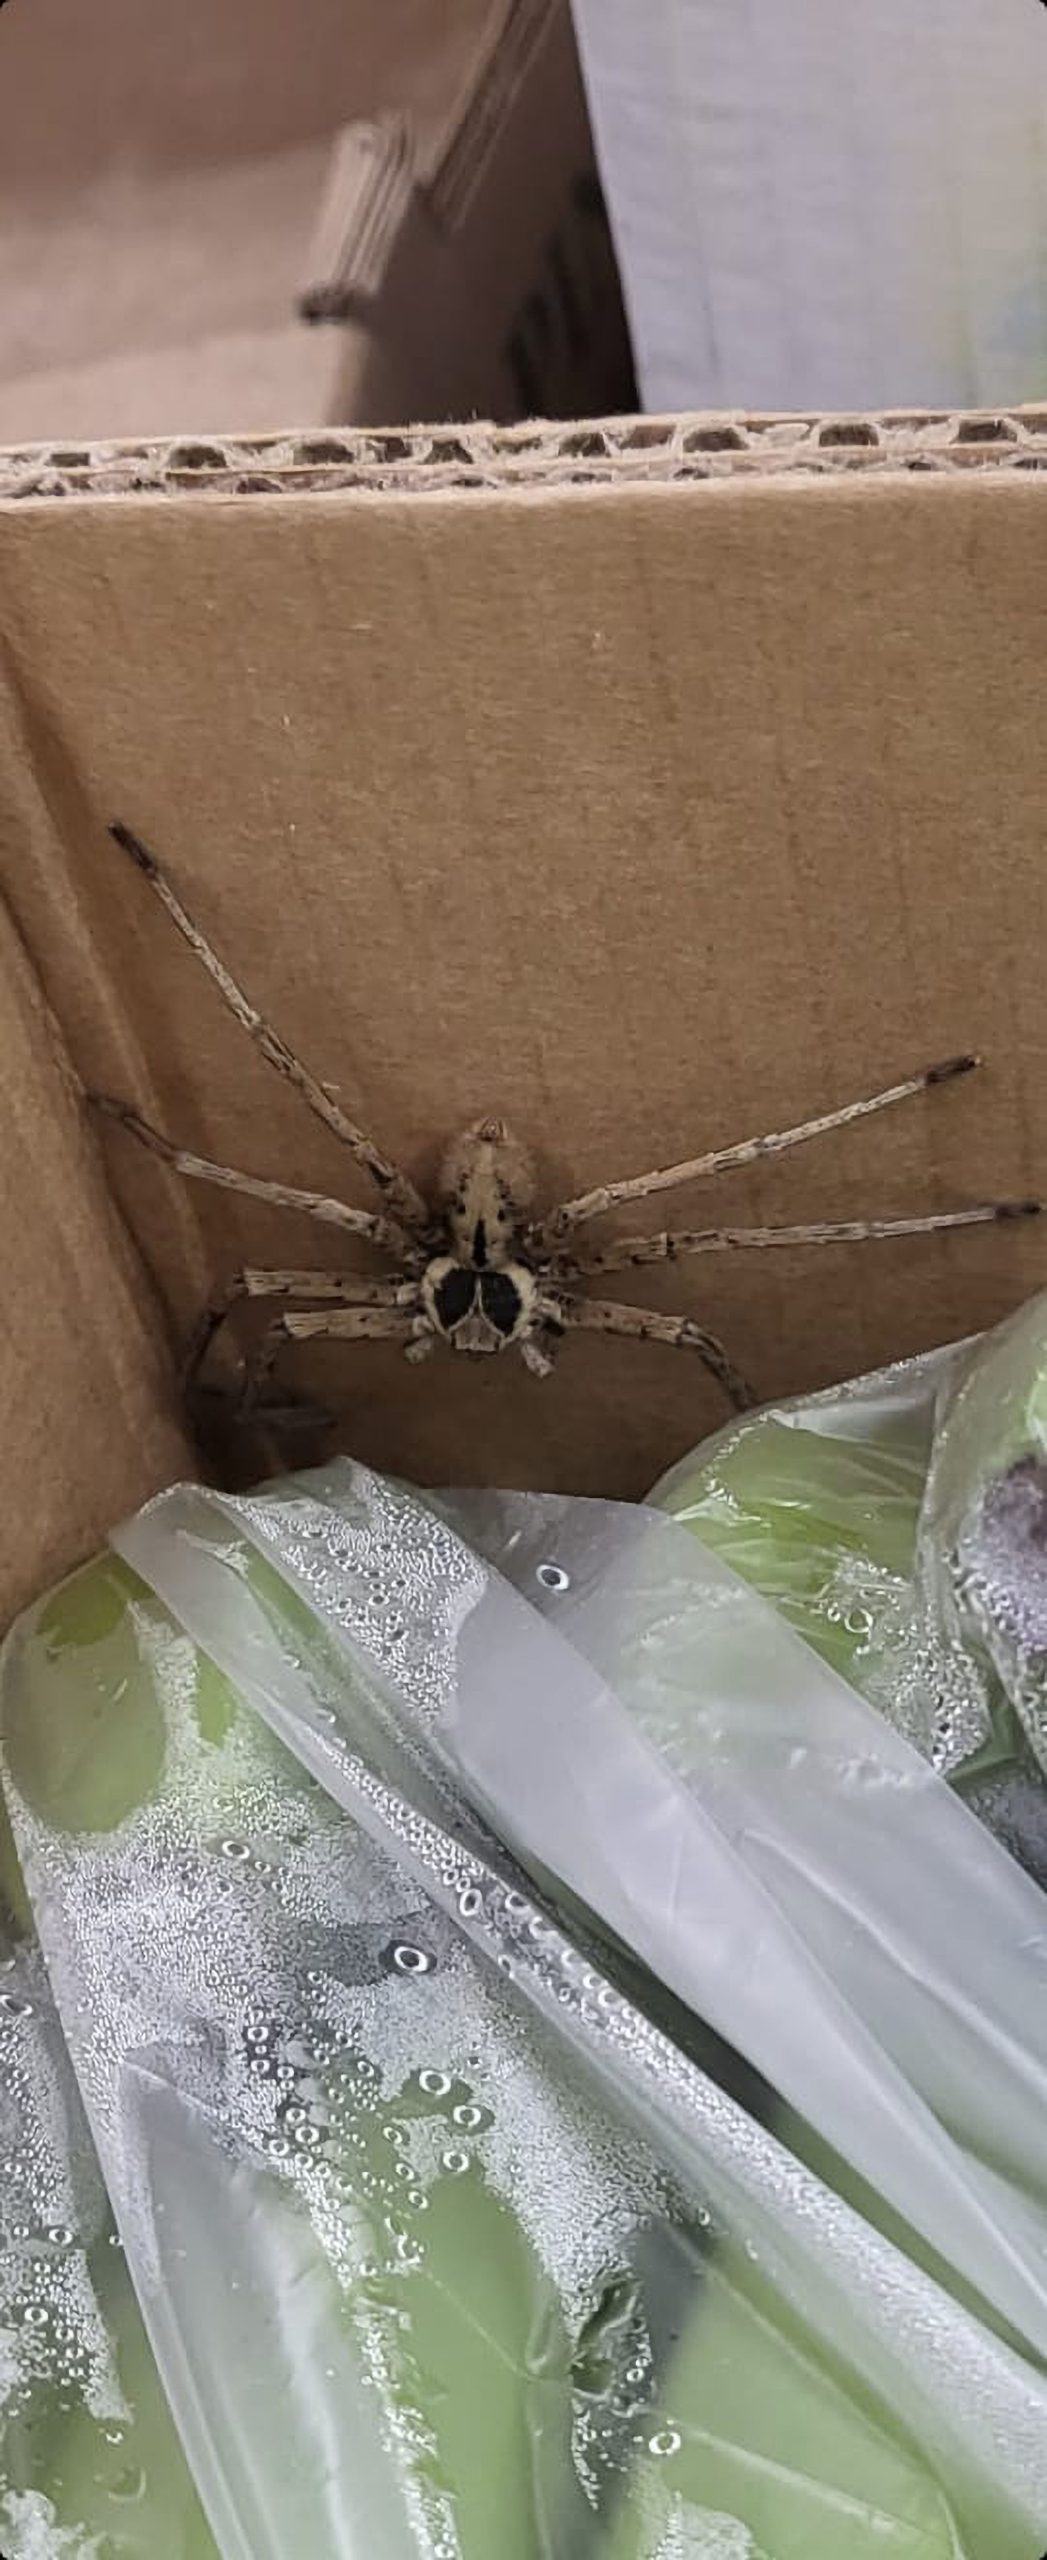 Read more about the article Third Scary Spider 8 Inches Long Found In Container In Germany